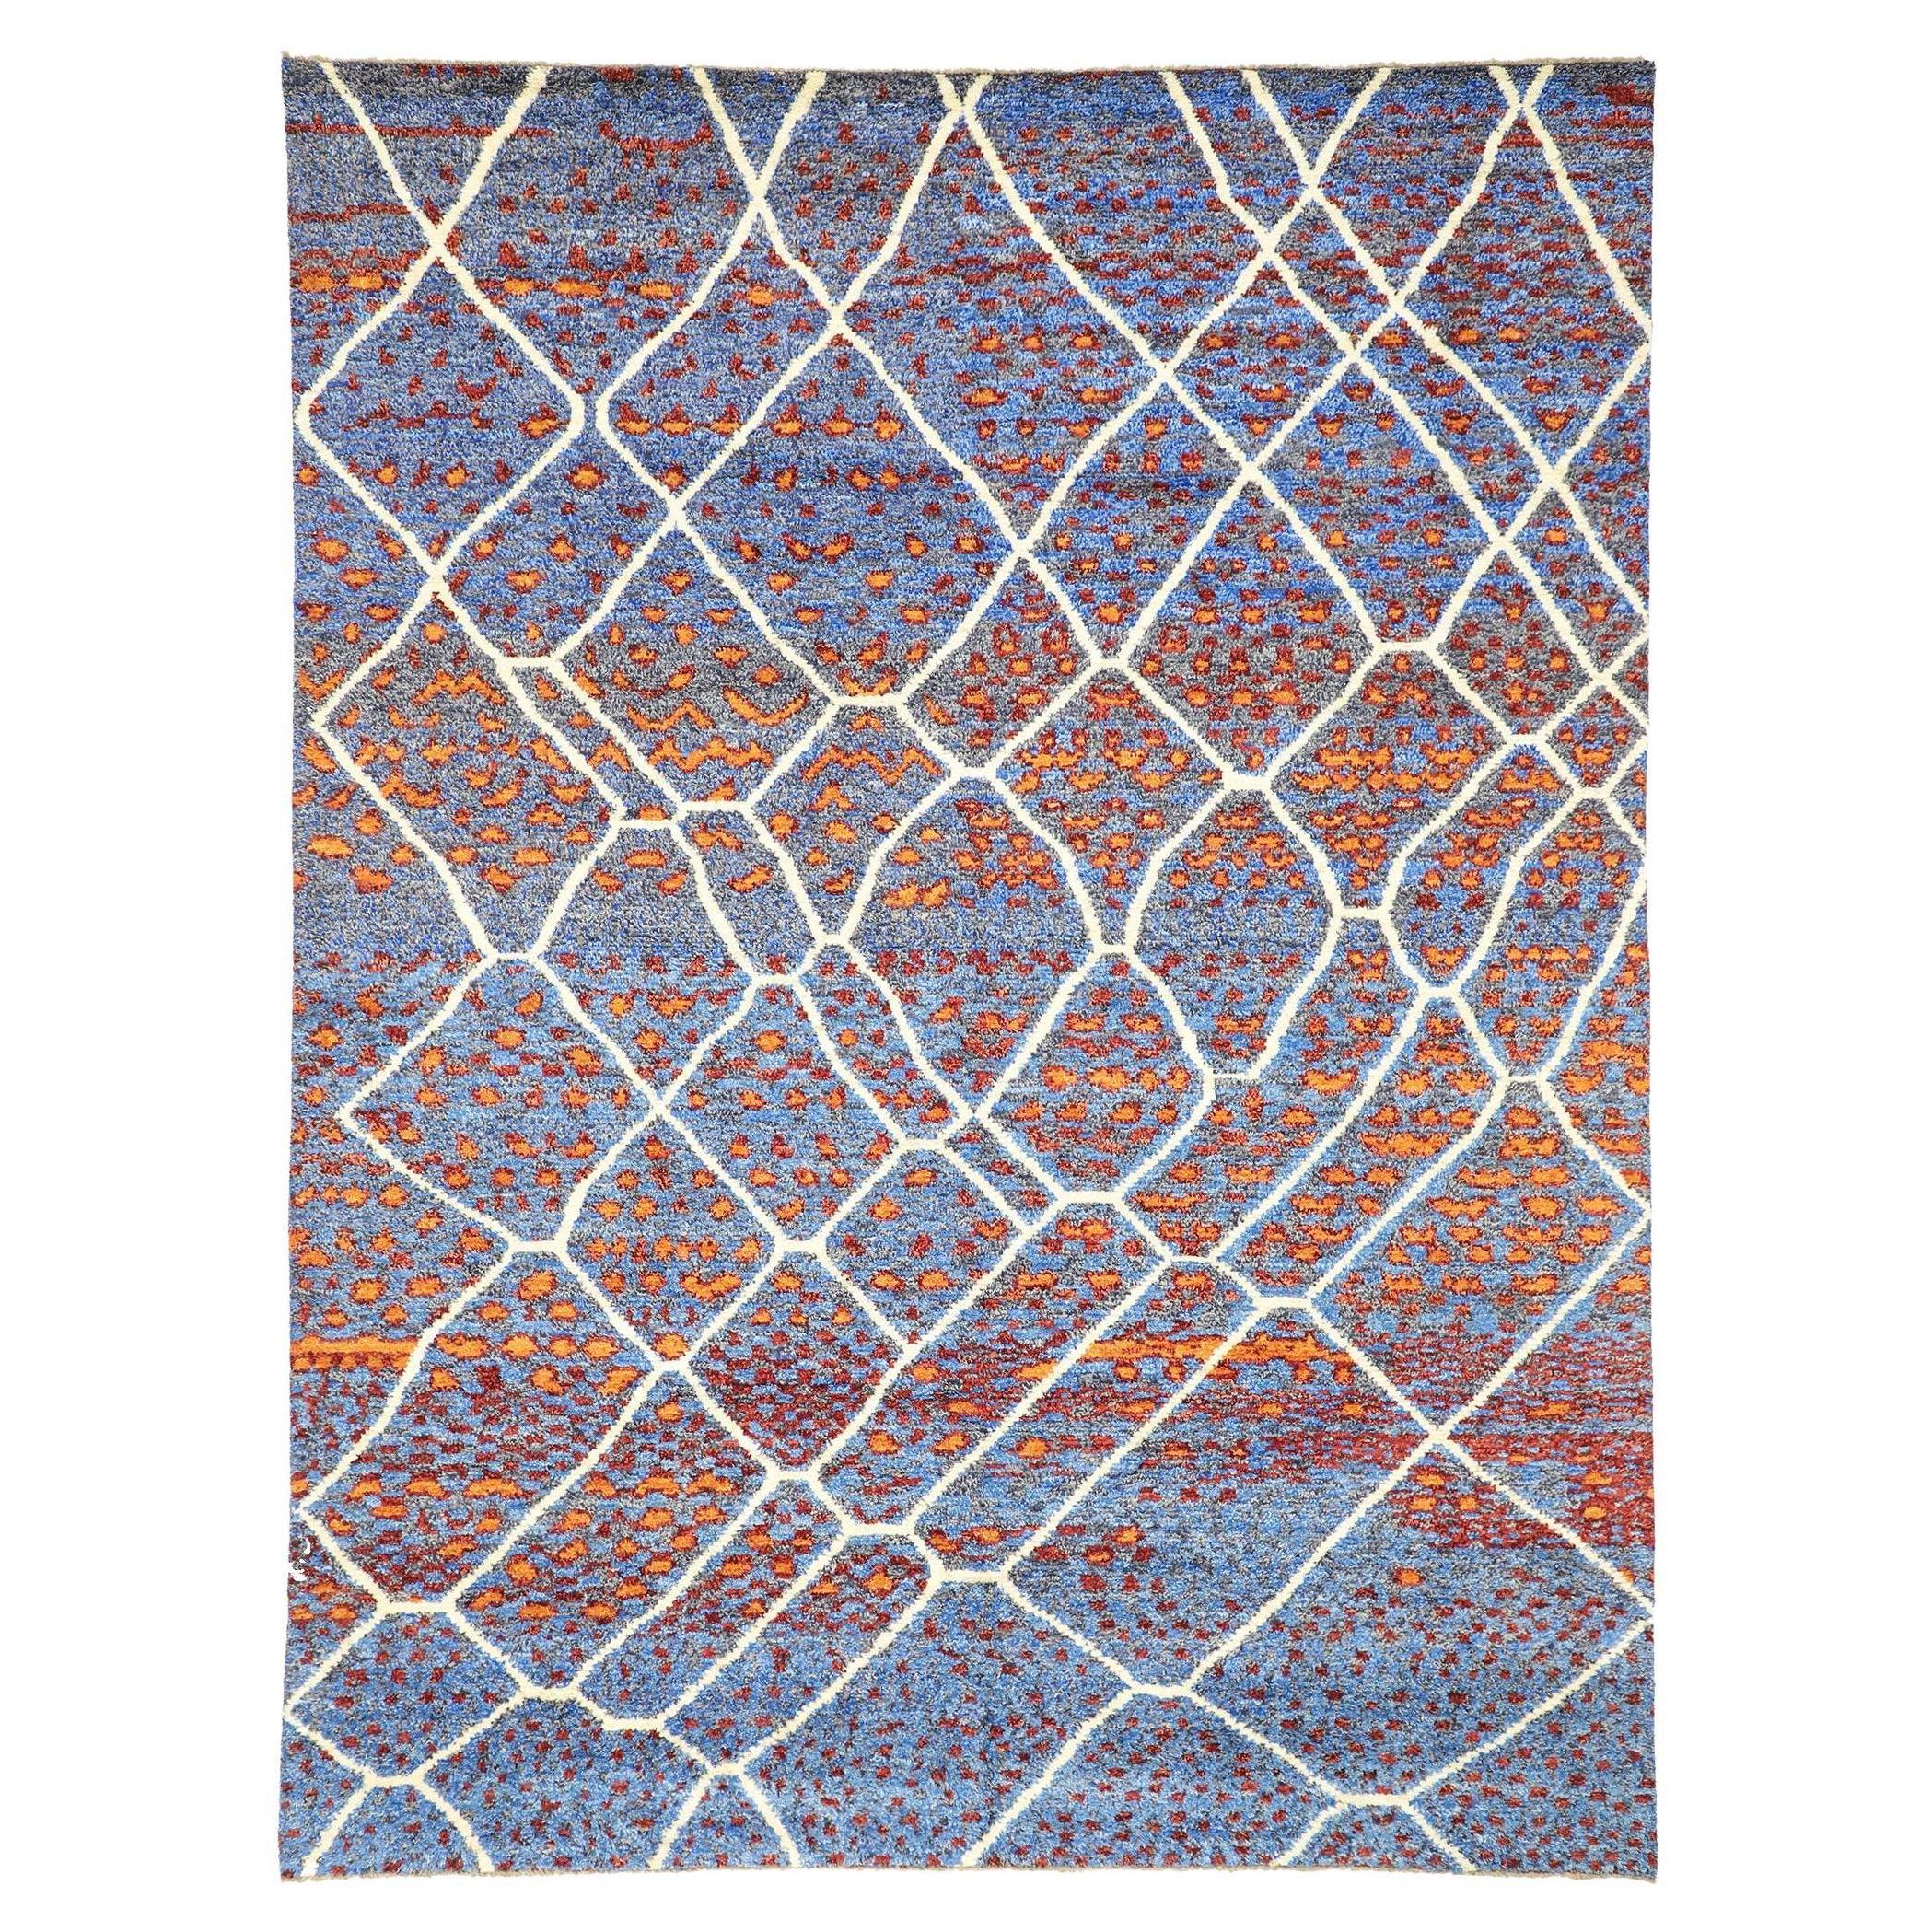 Large Abstract Moroccan Rug, Nomadic Charm Meets Abstract Expressionism